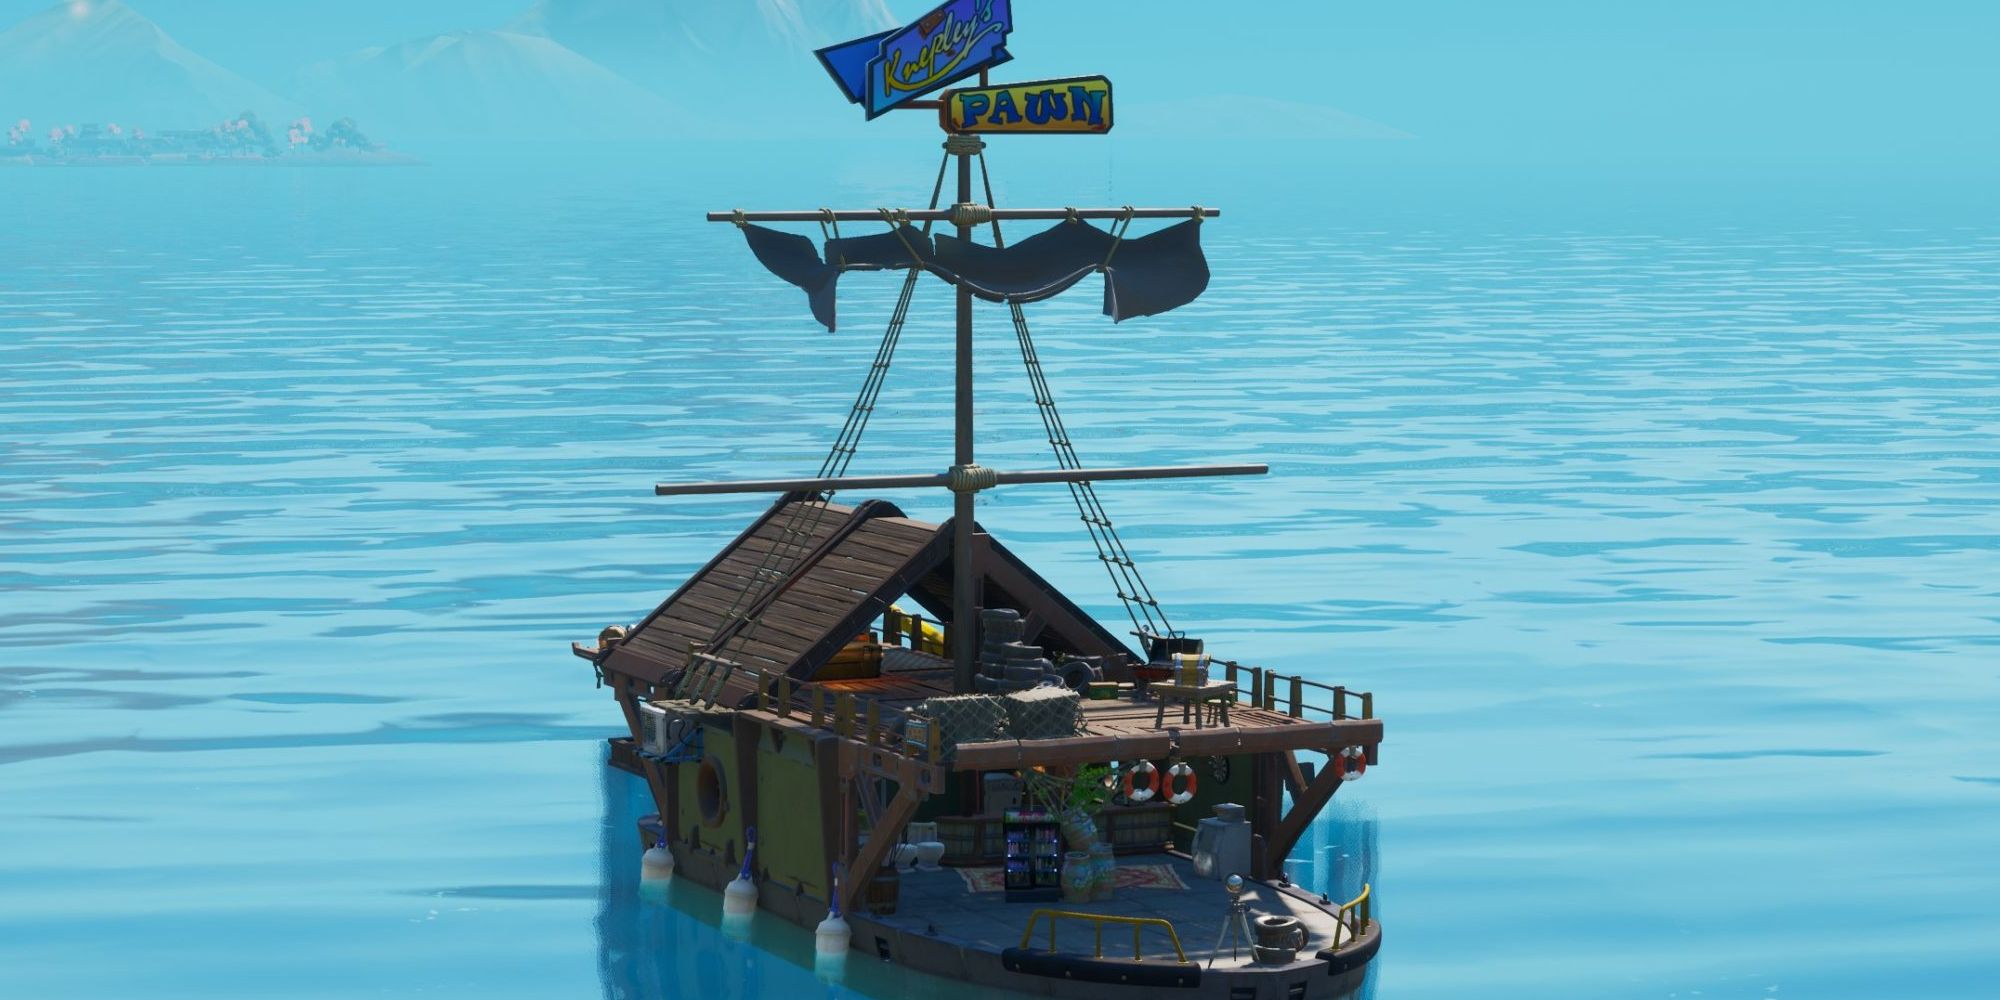 How To Find The Secret Loot Boat In Fortnite Season